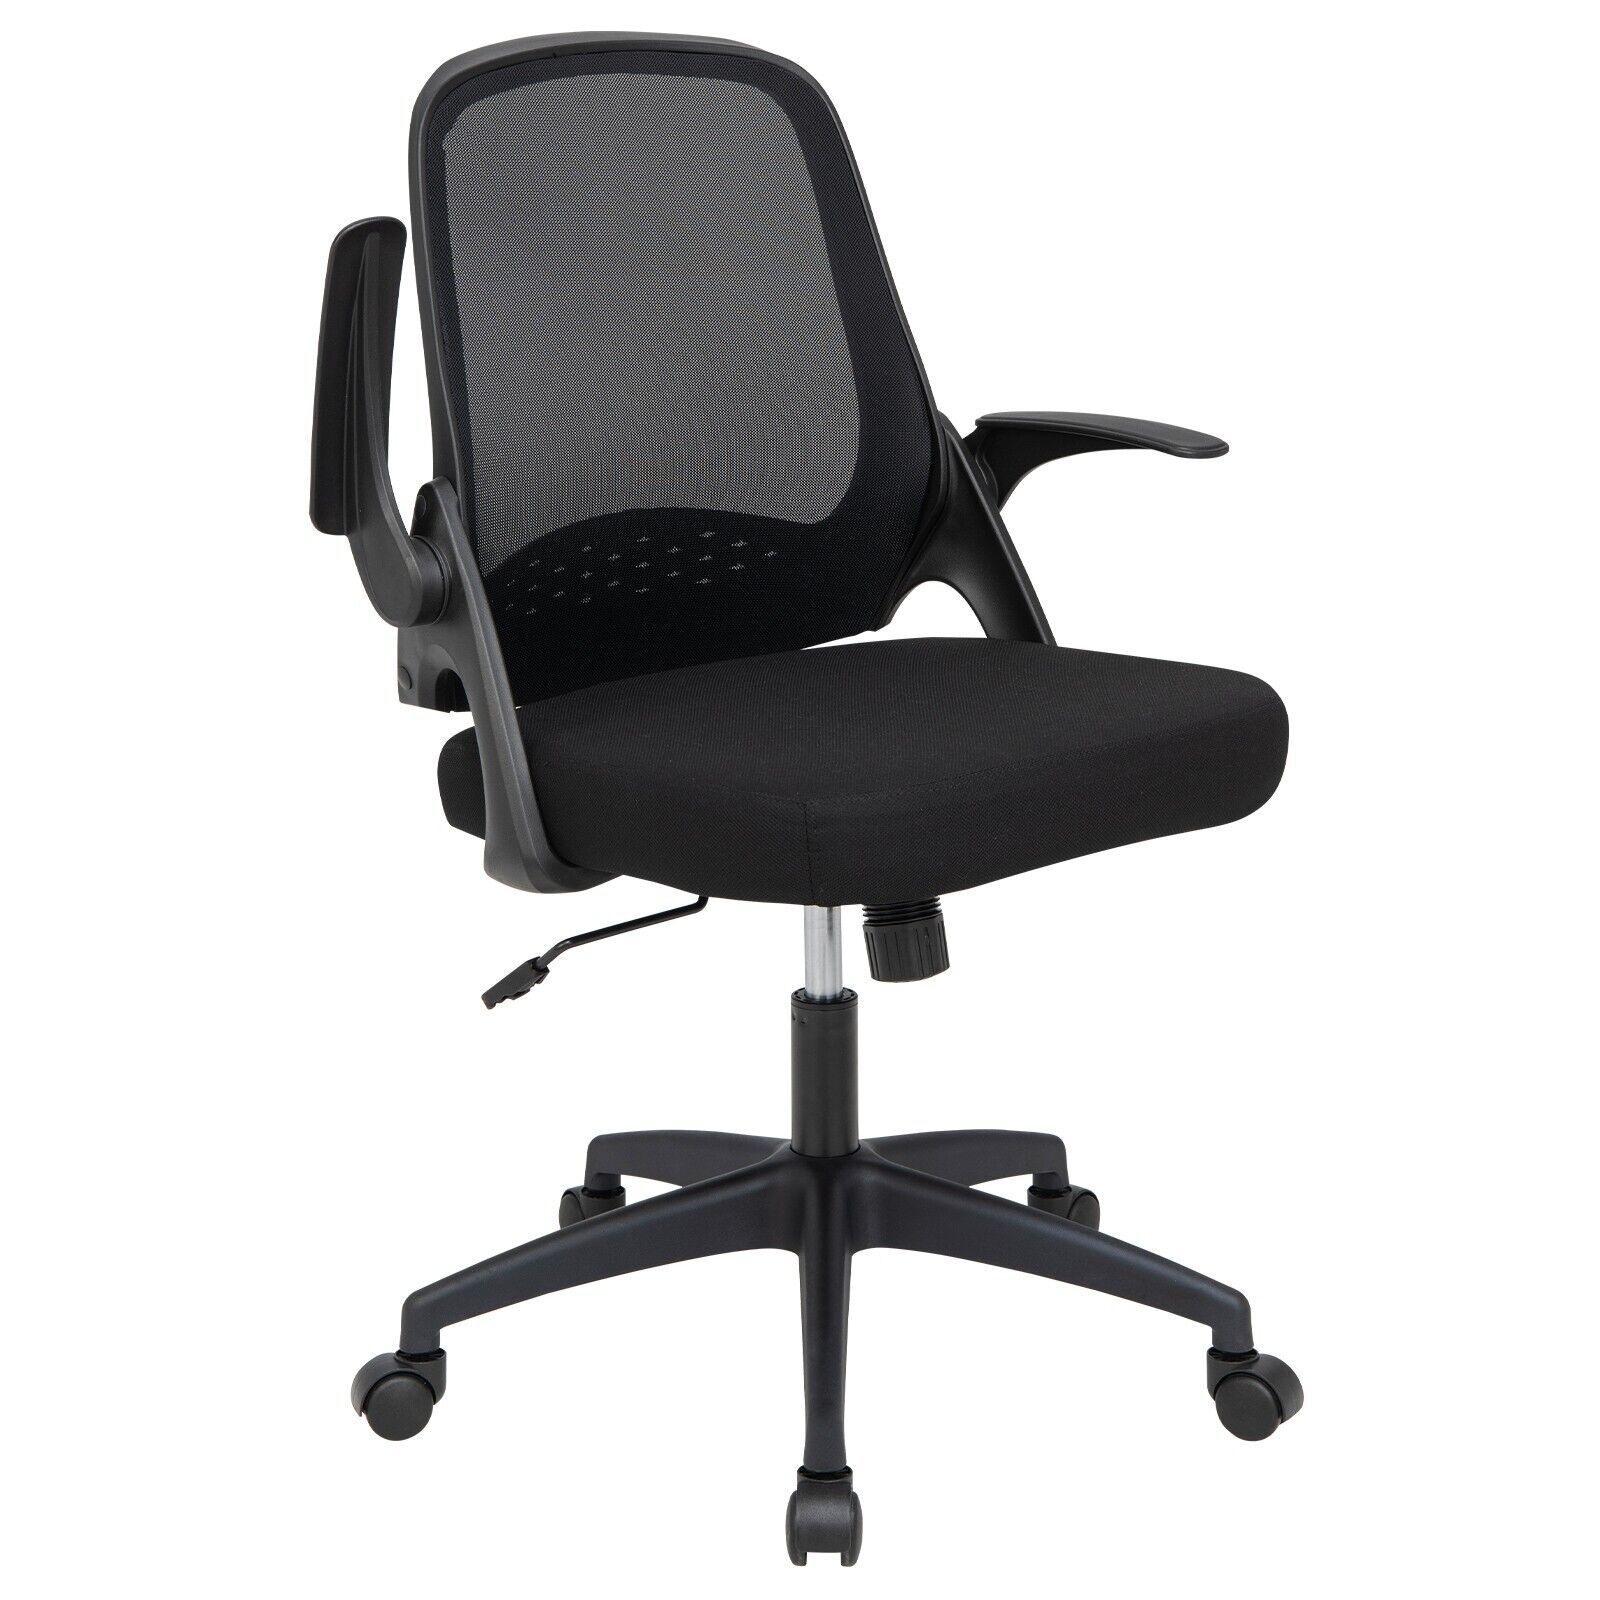 Height Adjust Swivel Rolling Mesh Office Chair with Ergonomic Mid-Back Black